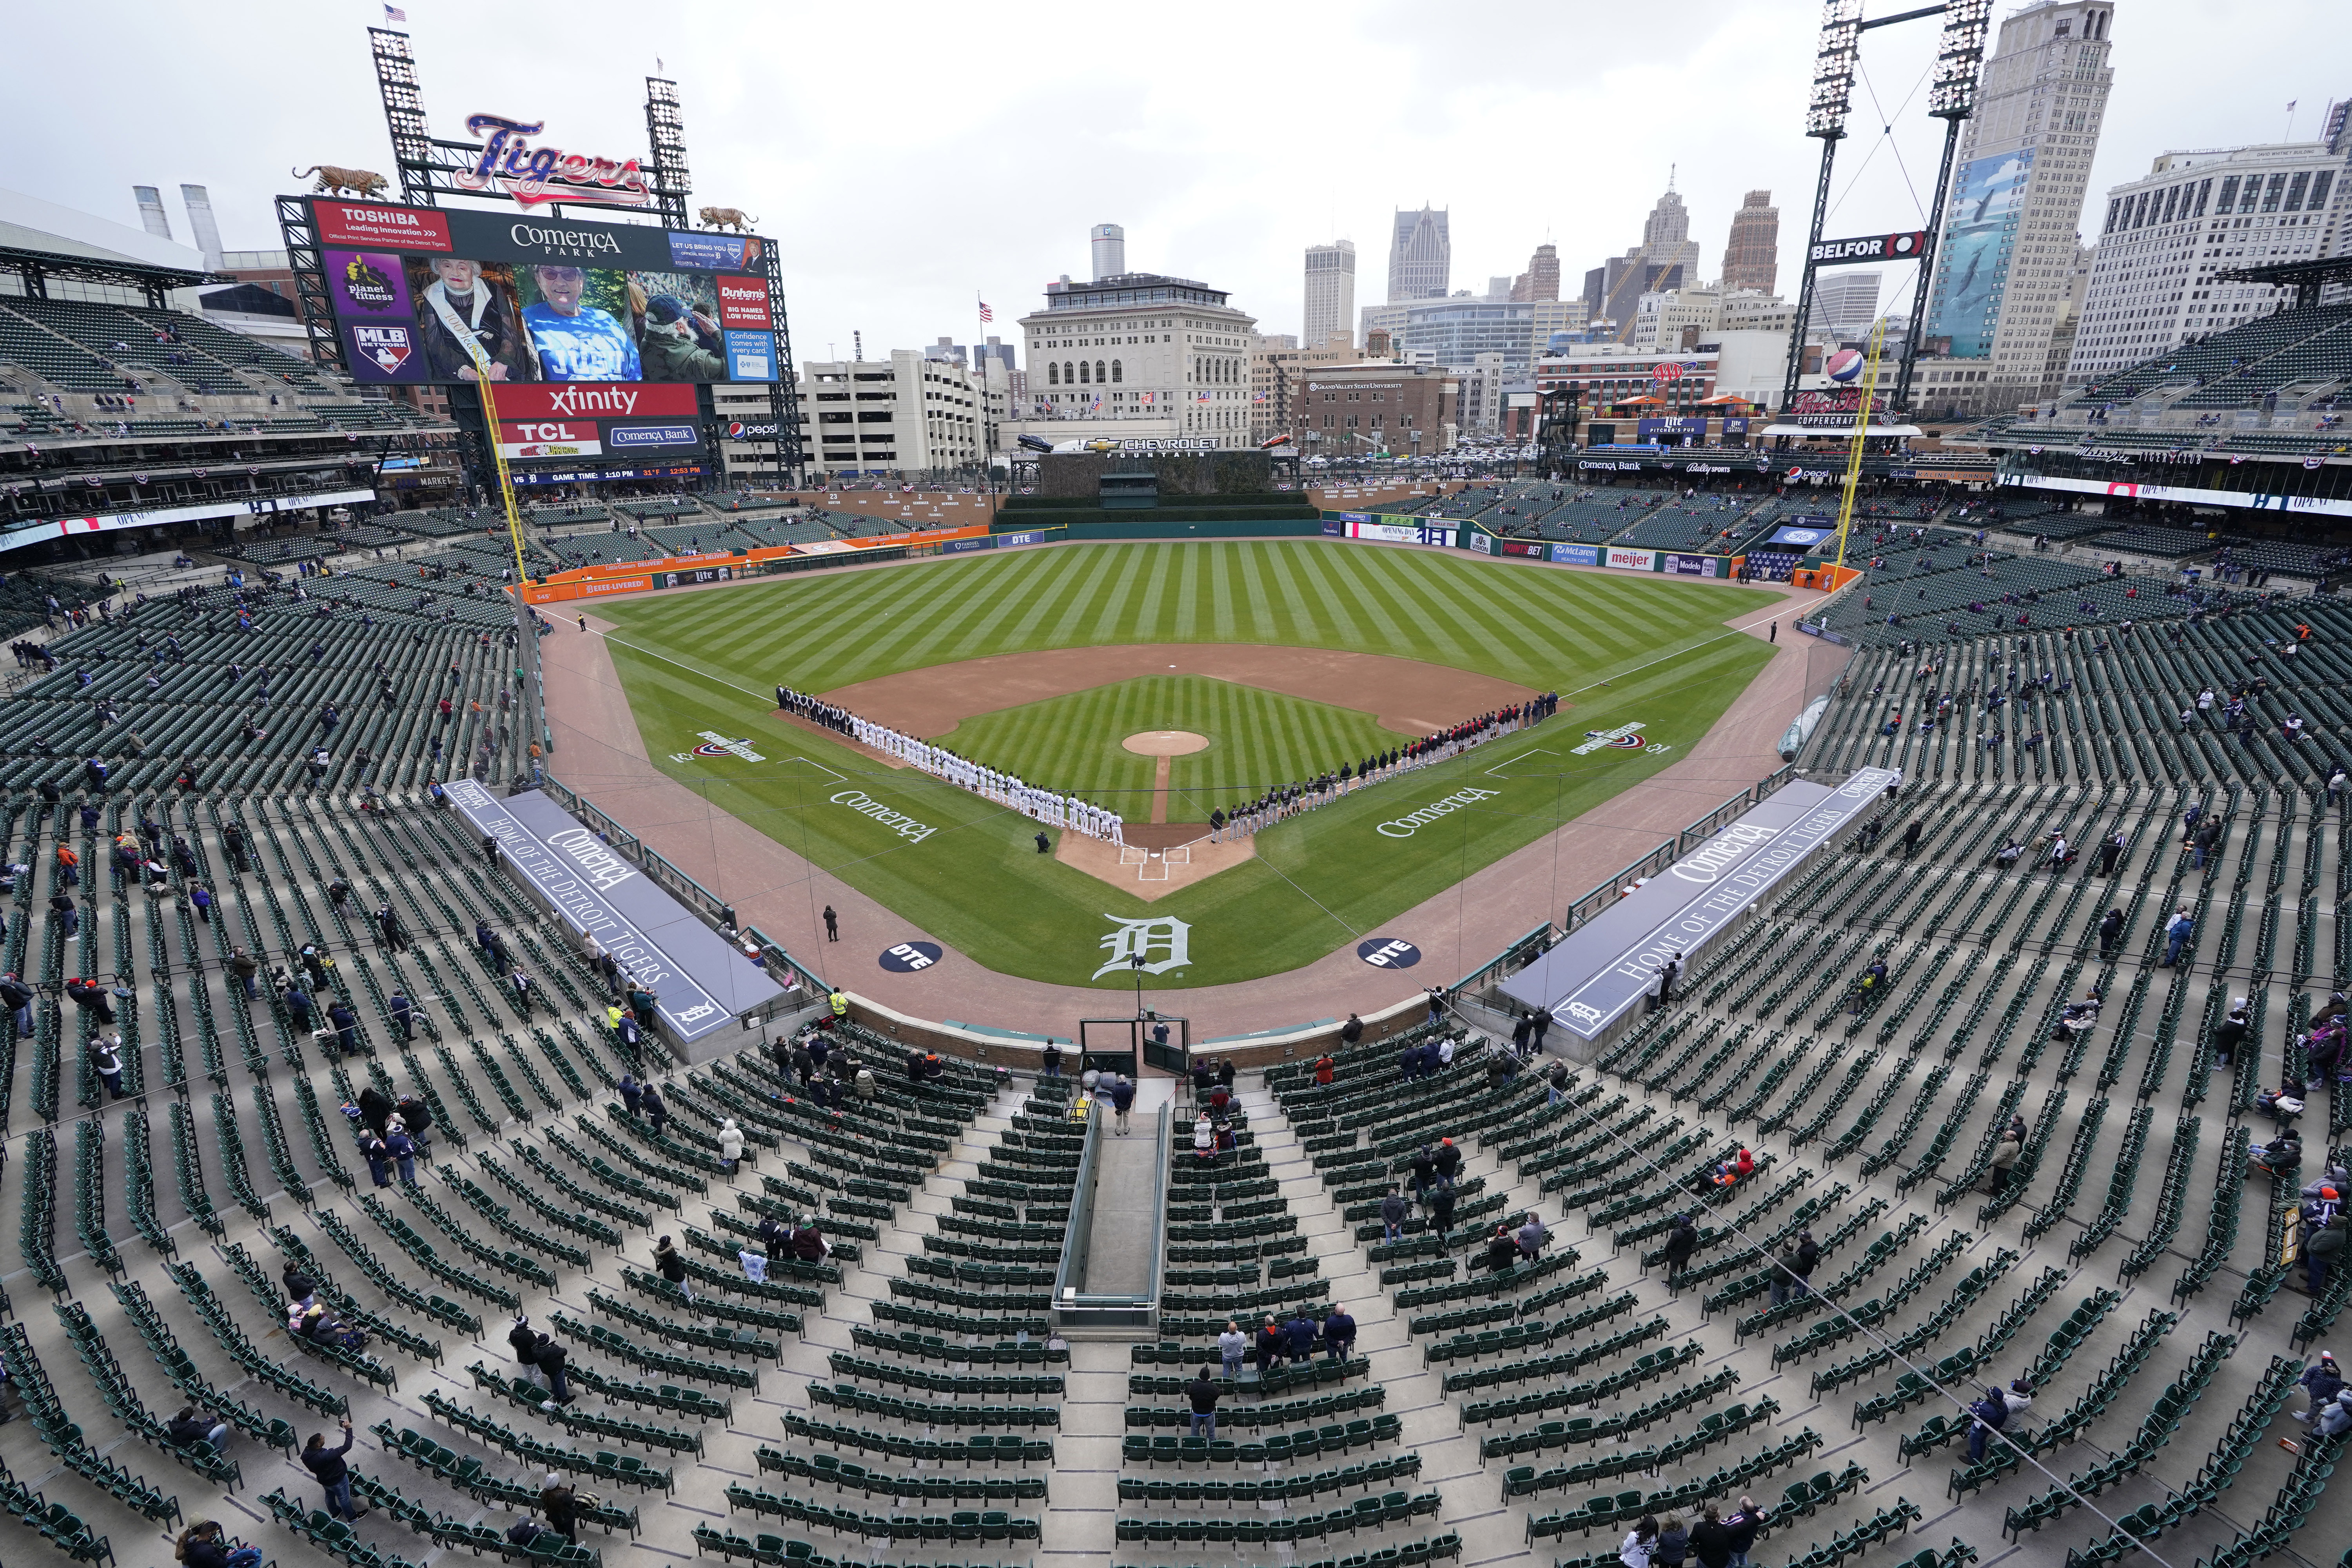 Opening Day at Comerica Park: Where to park, how to get in, and more